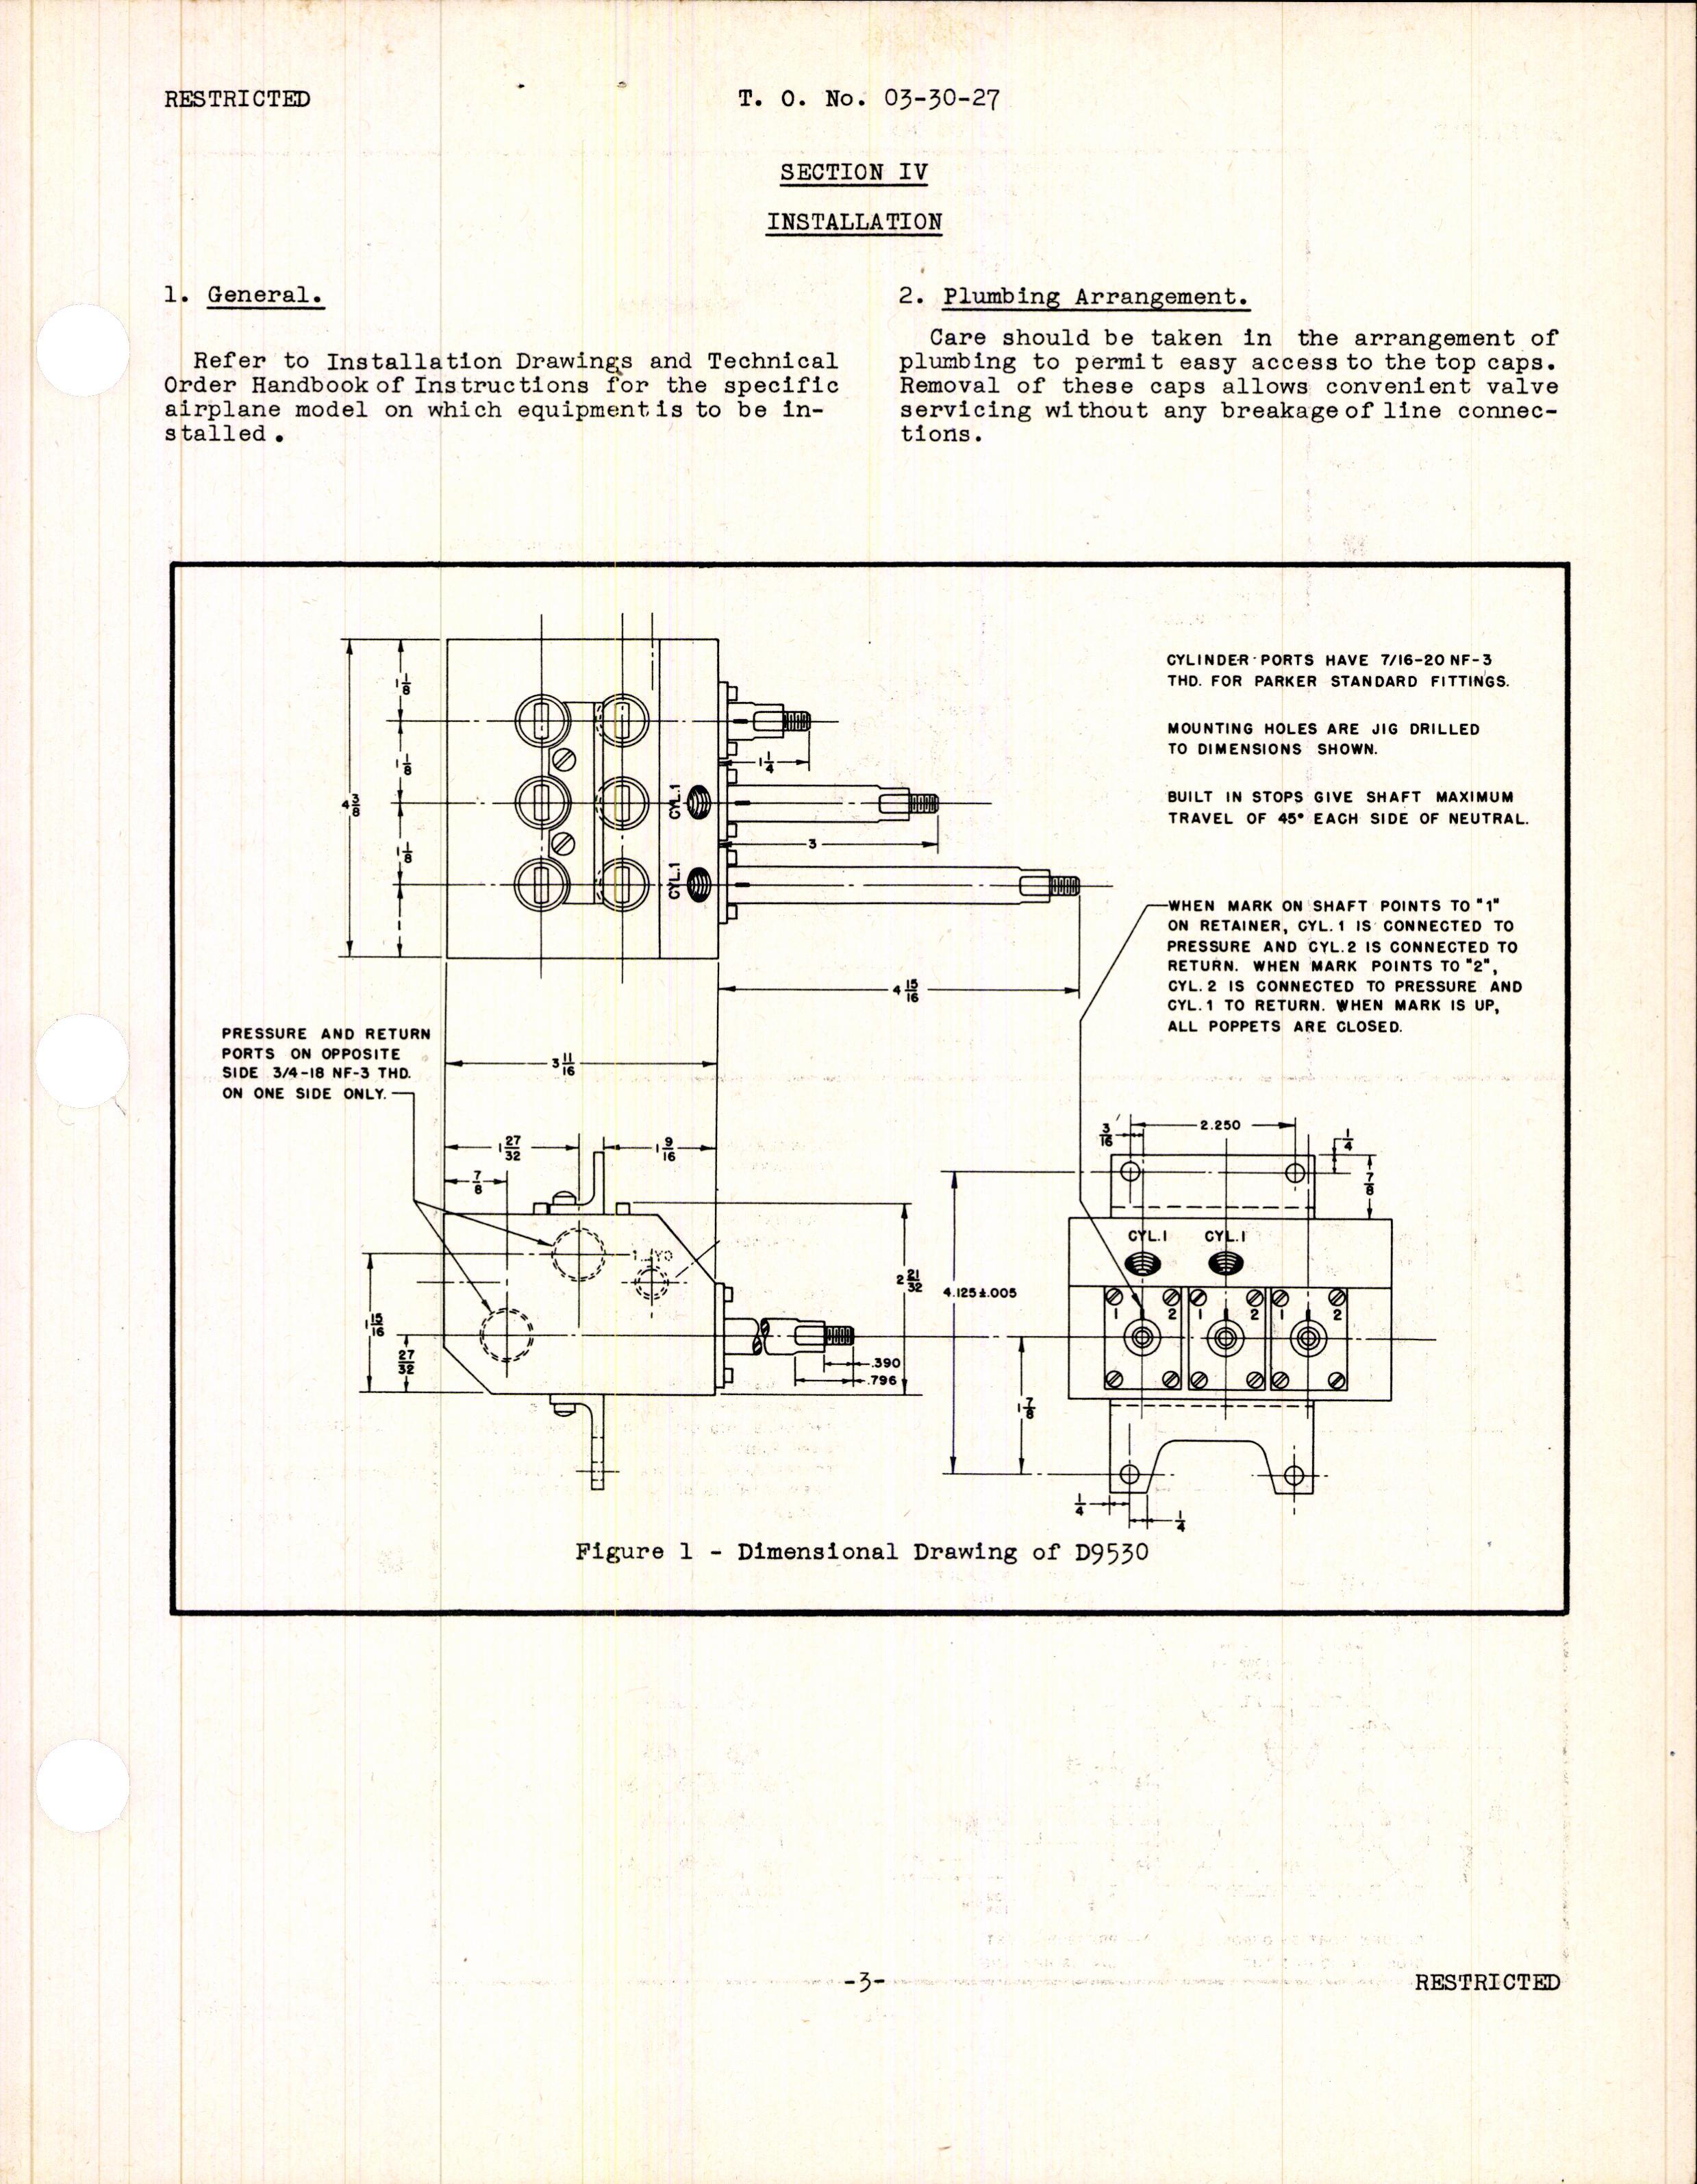 Sample page 5 from AirCorps Library document: Handbook of Instructions with Parts Catalog for Hydraulic Selector Valves